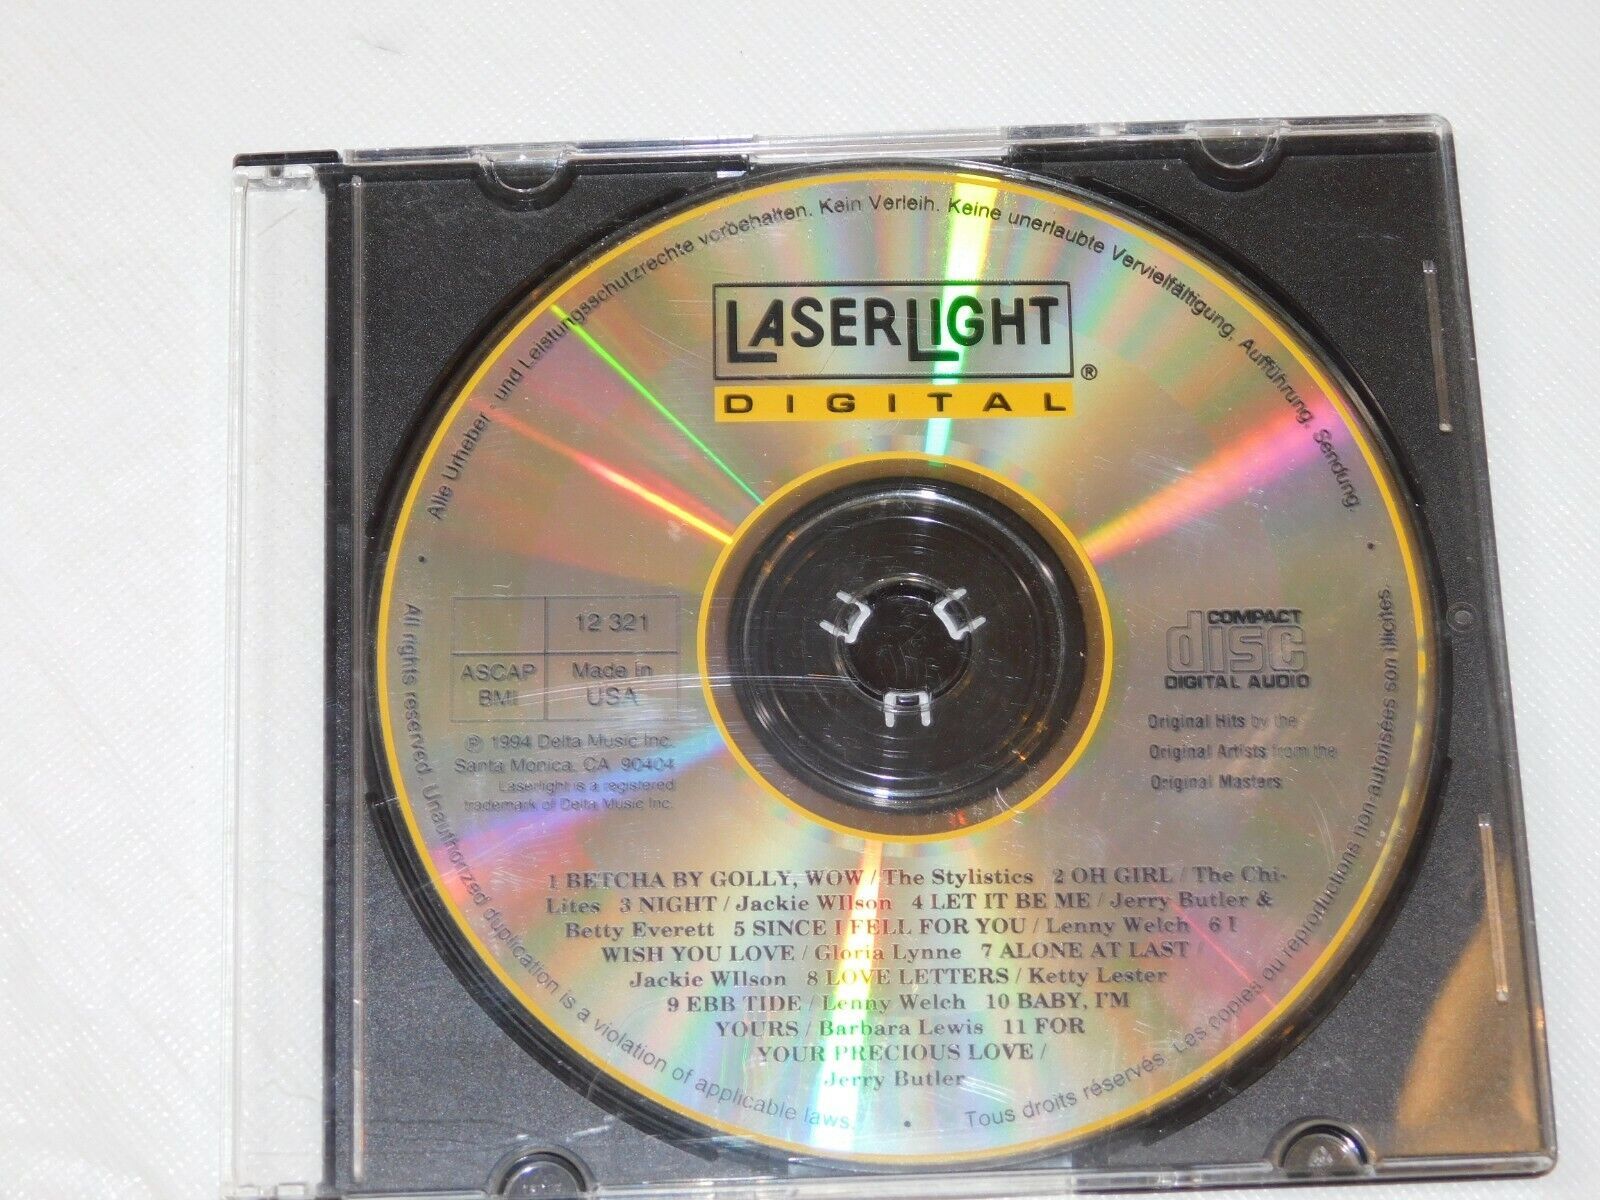 Primary image for Laserlight Digital Various Artists CD 1994 Delta Music Jackie Wilson Lenny Welch